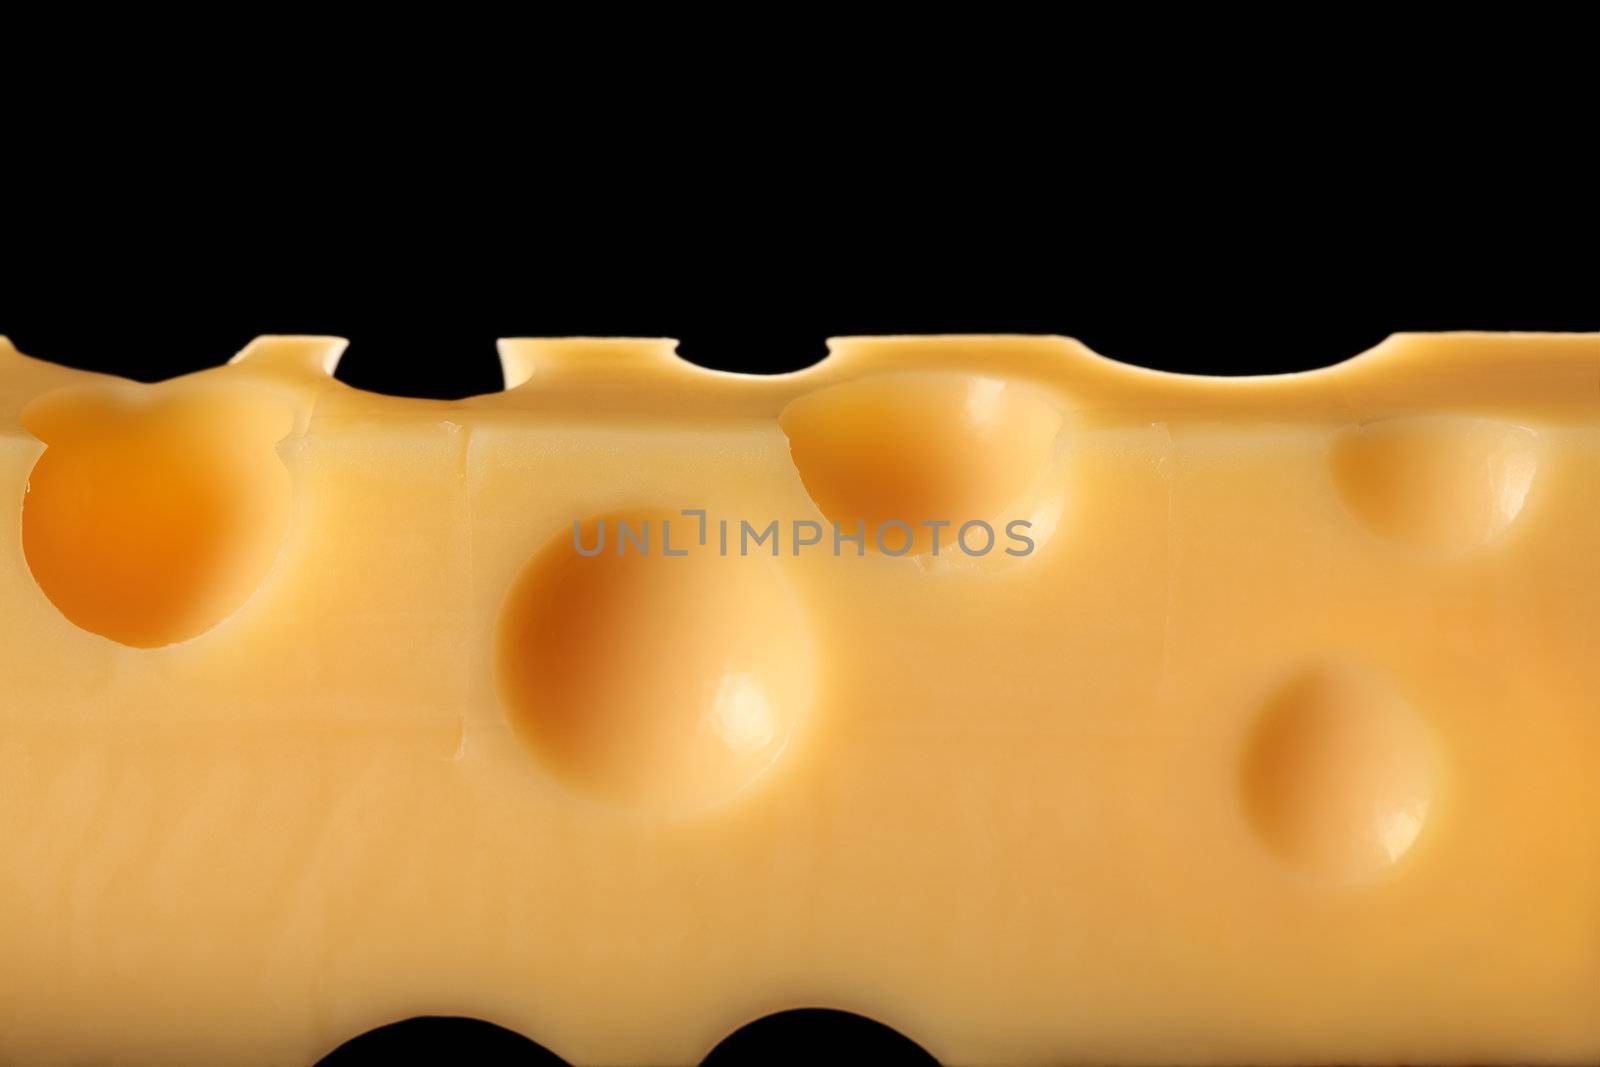 Macro photo of a block of Emmentaler cheese from Switzerland.  Backlit over a black background.